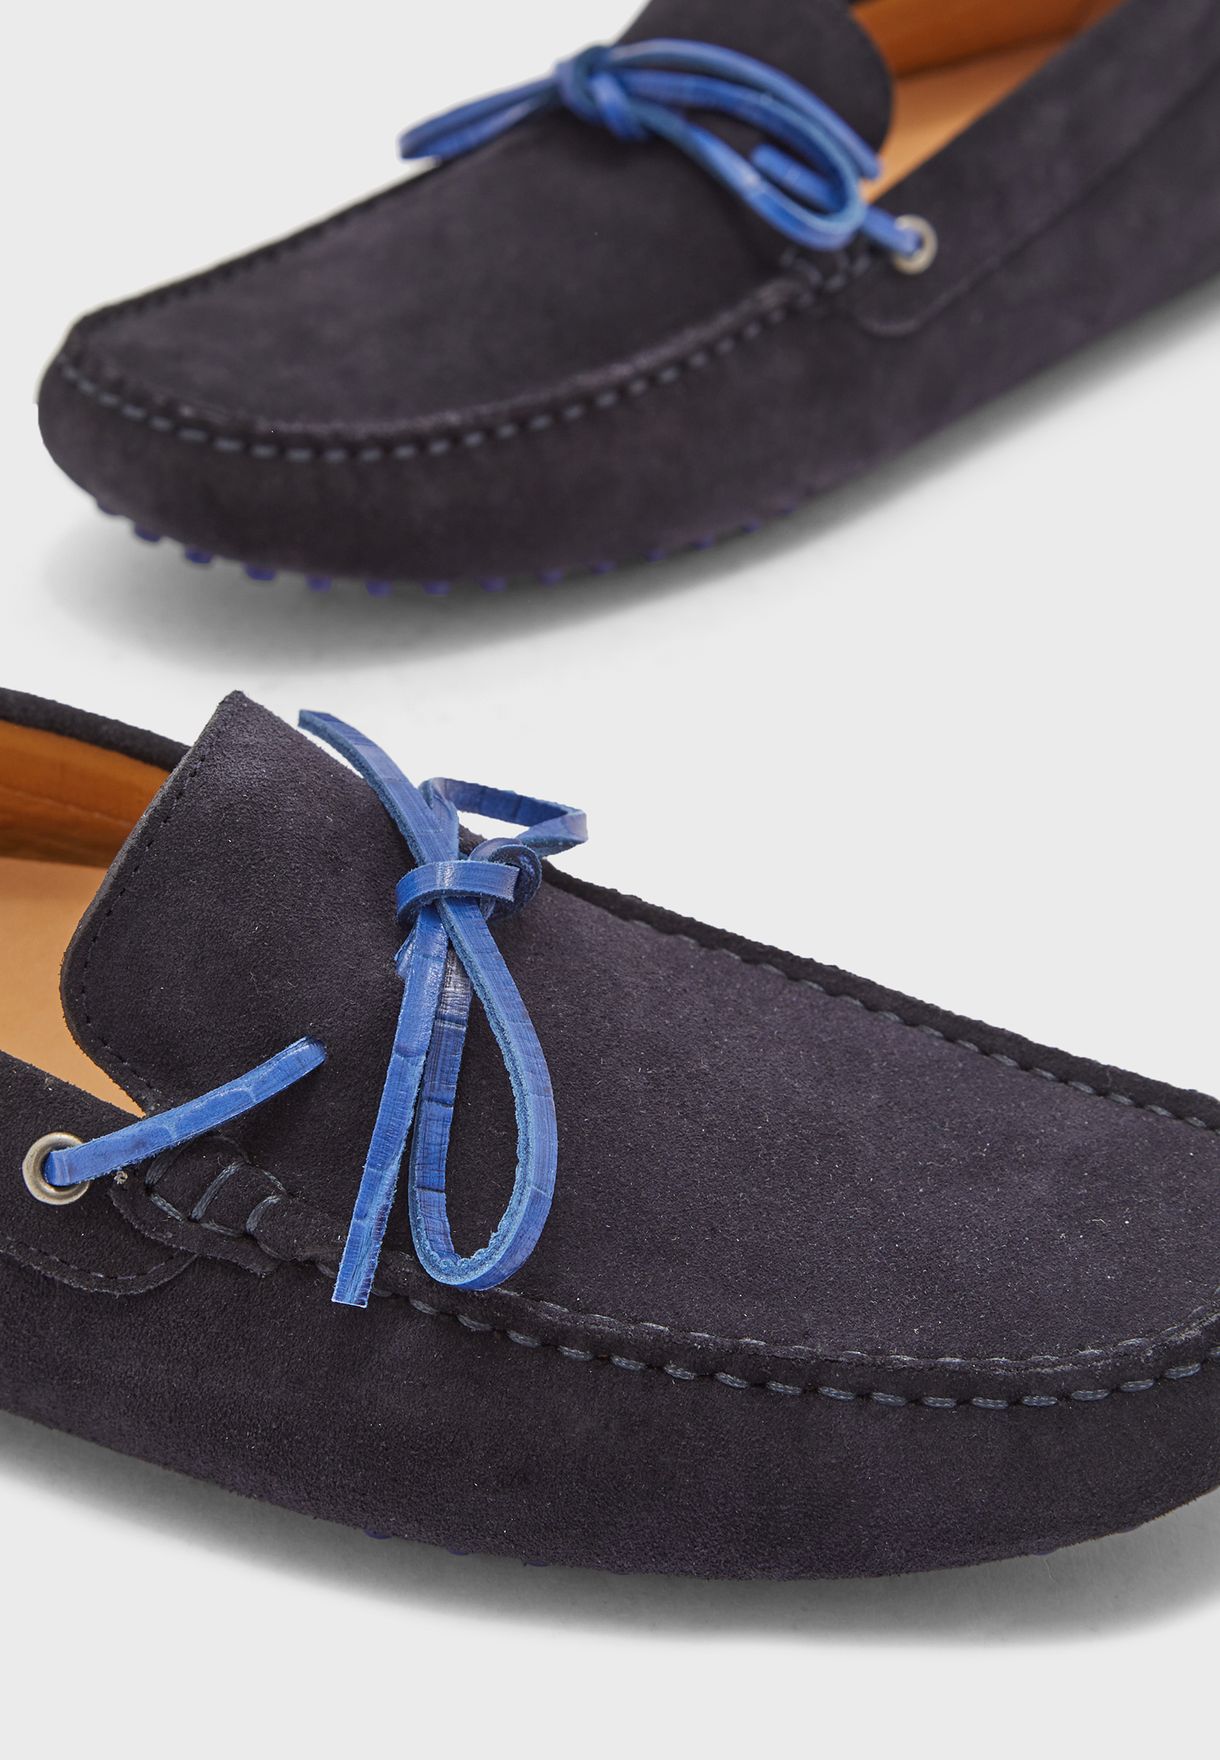 Slip Ons Loafers & Moccasins